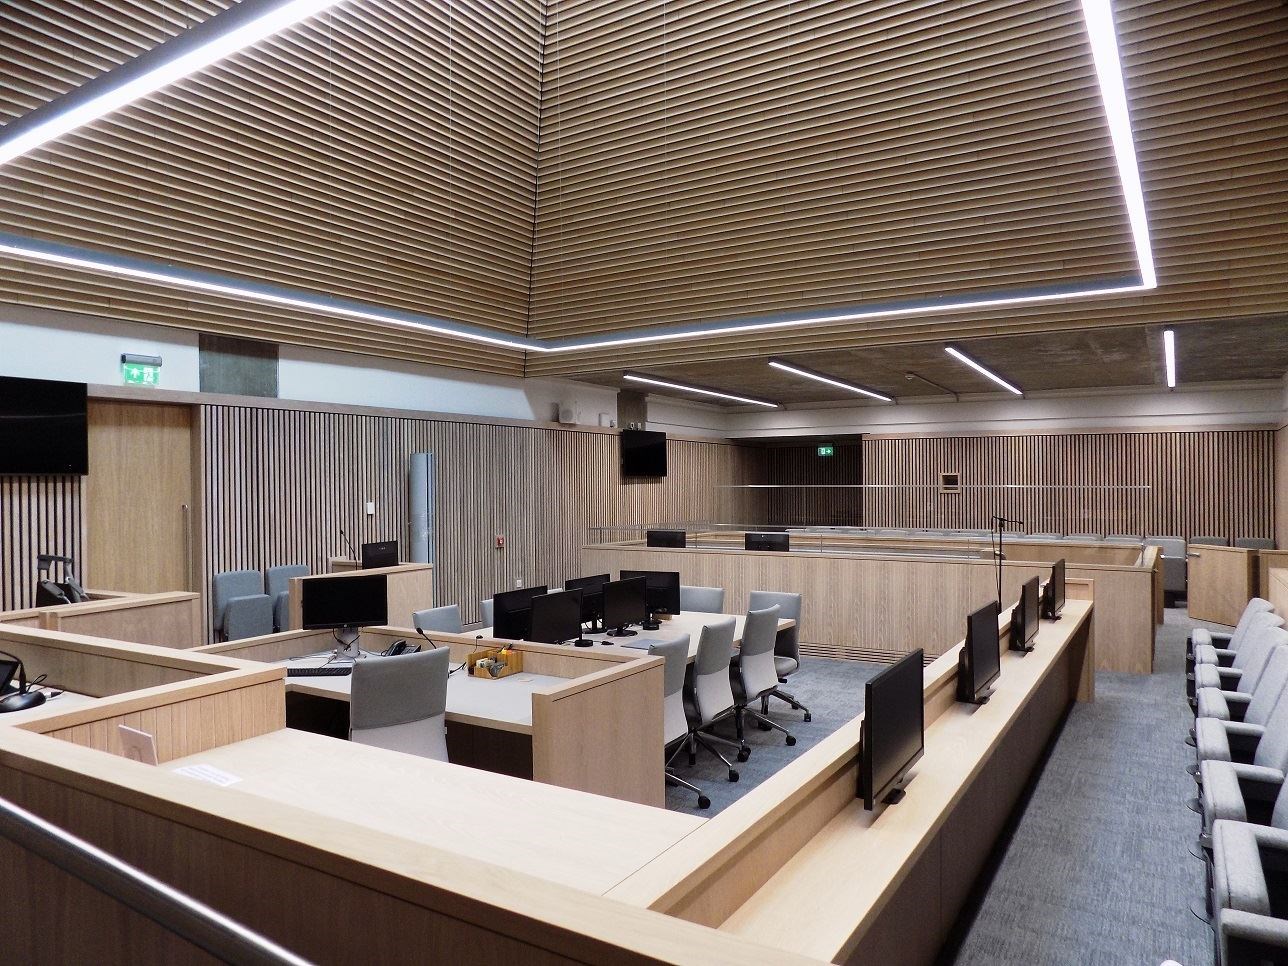 One of the court rooms at the Inverness Justice Centre.